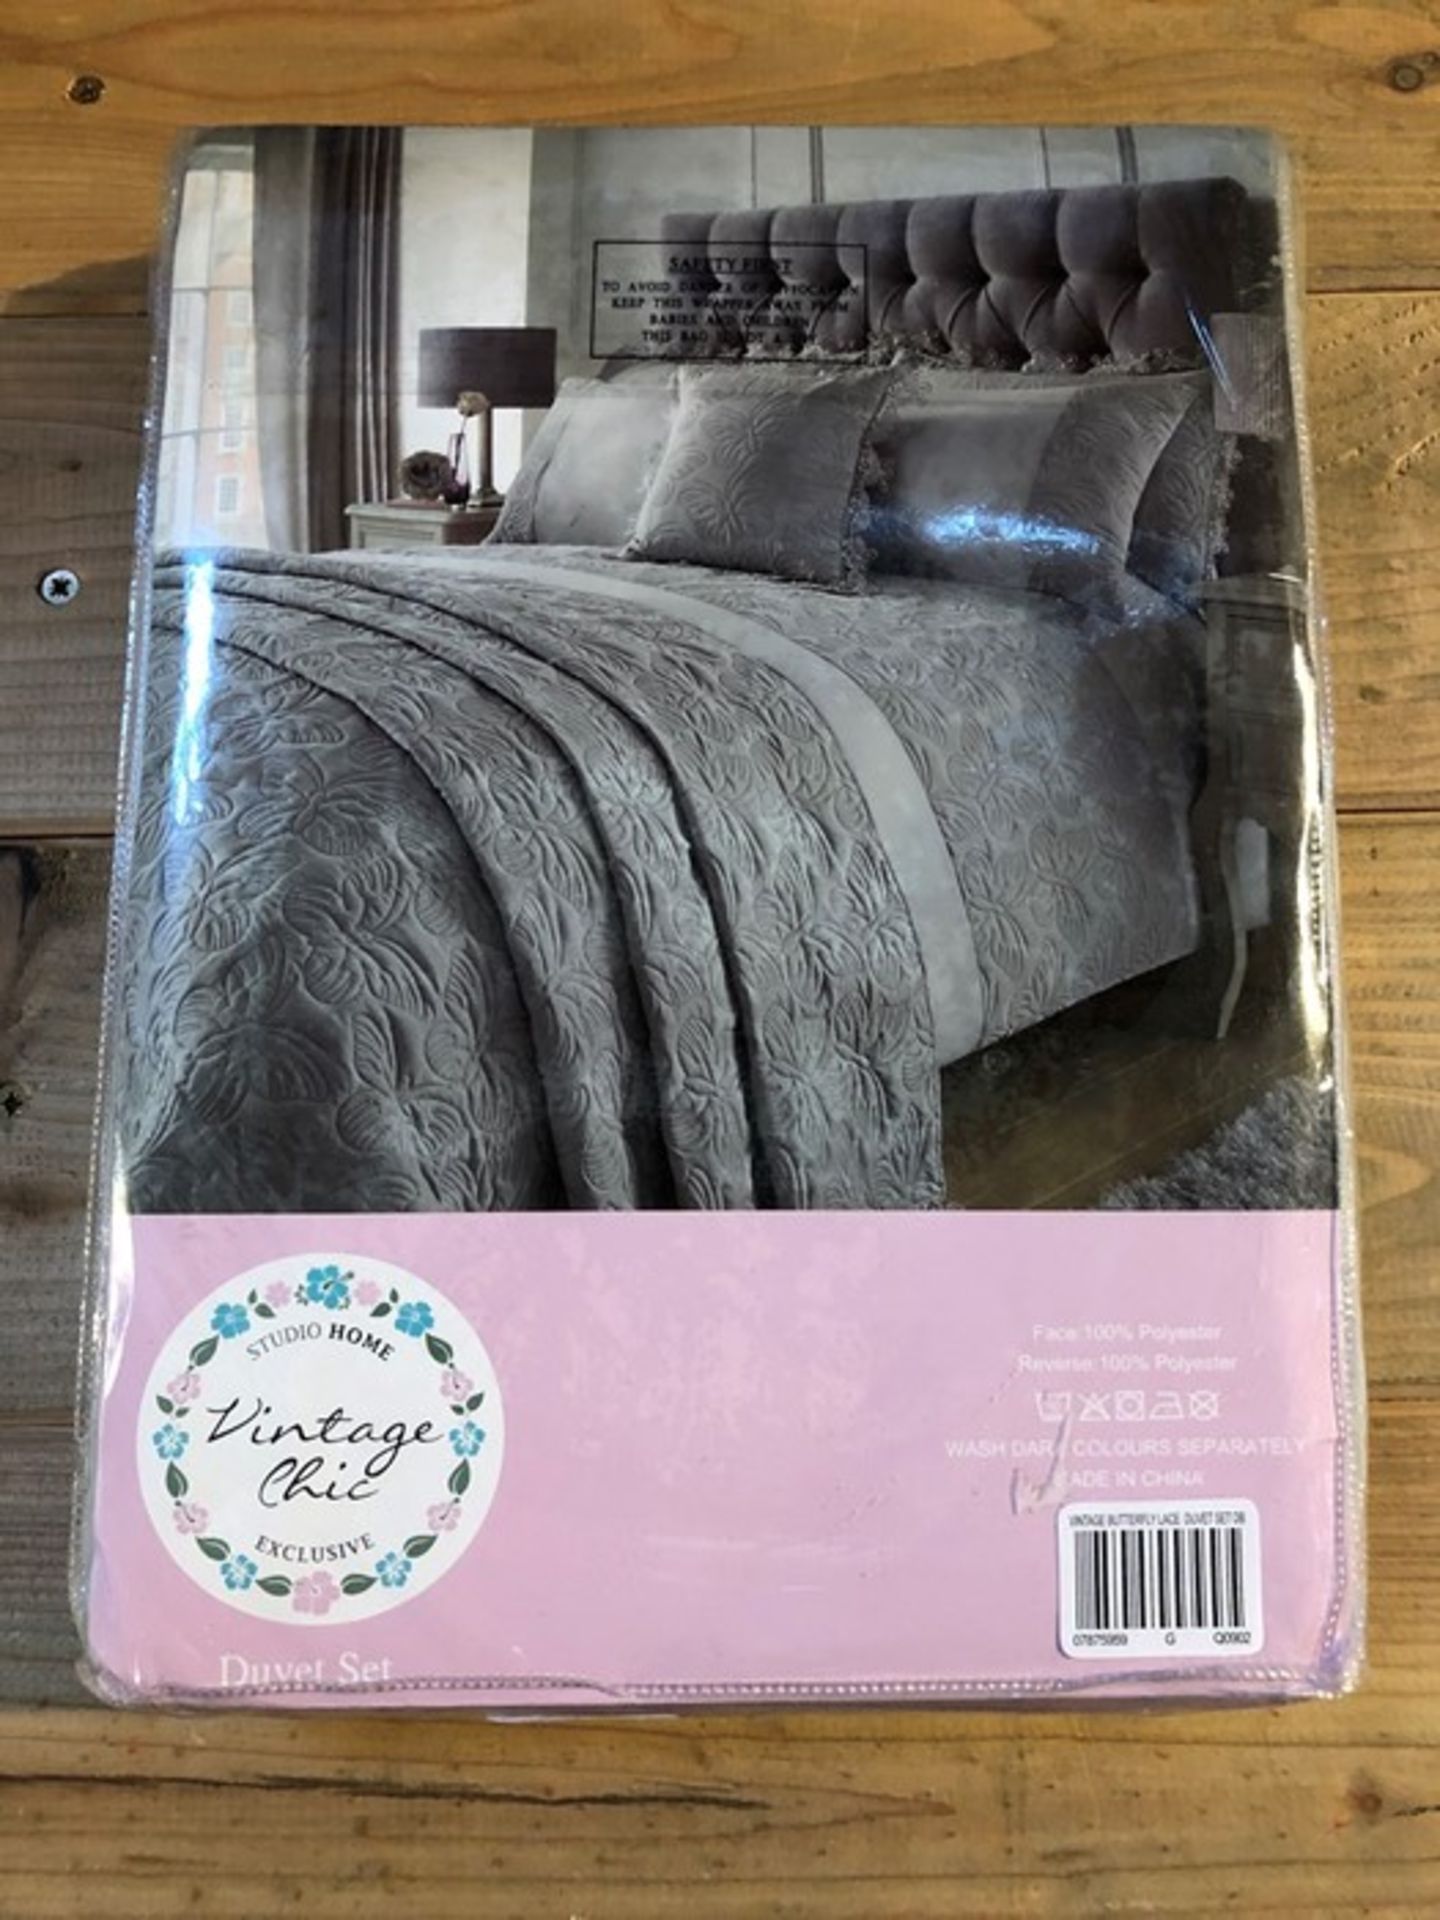 1 BAGGED VINTAGE BUTTERFLY LACE DUVET SET IN GREY / SIZE DOUBLE (PUBLIC VIEWING AVAILABLE)